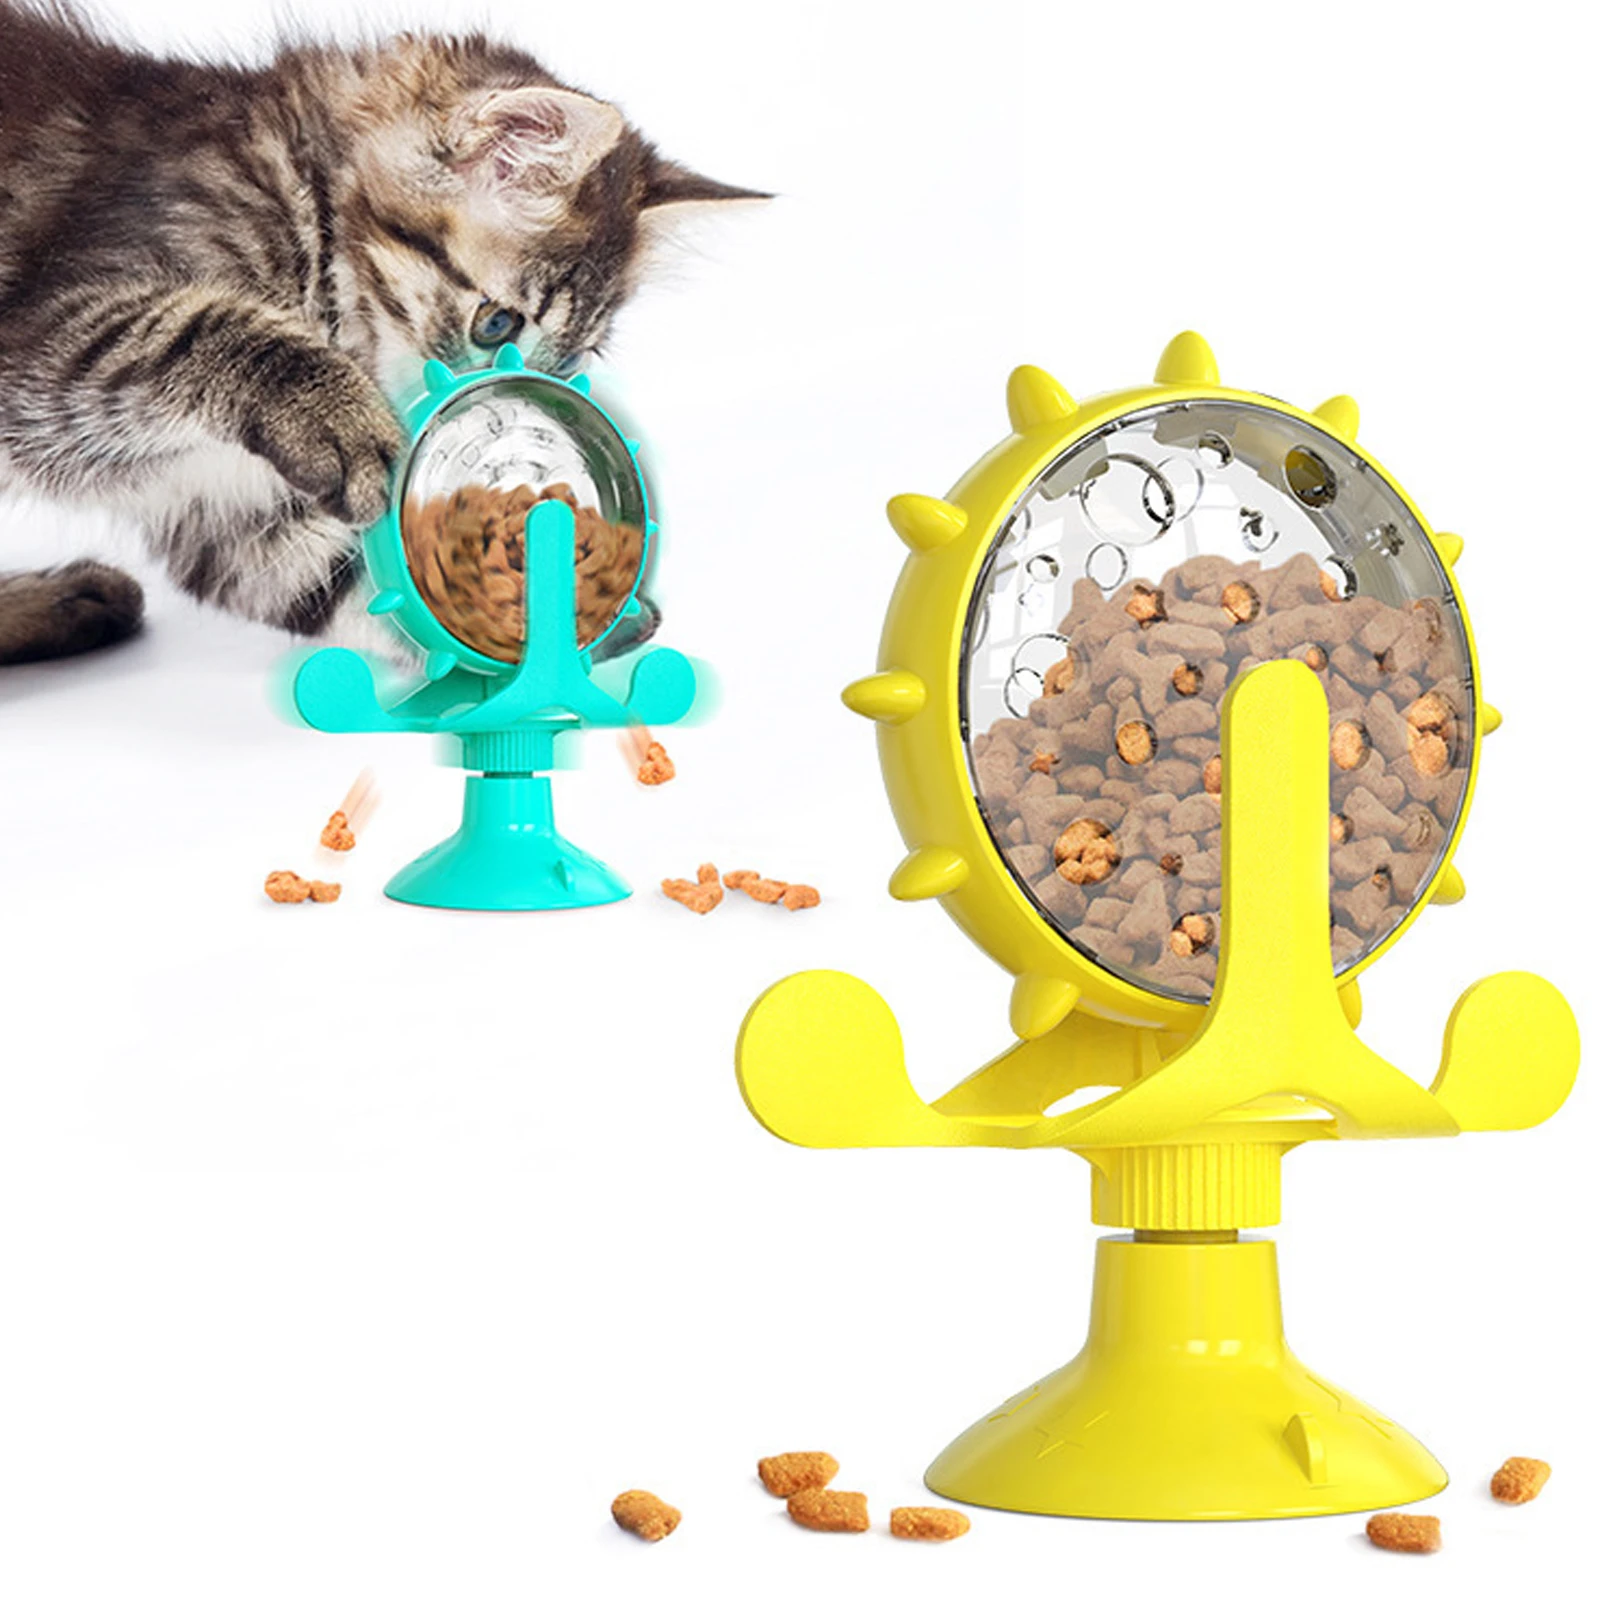 Leak Food Cat Toy Interactive Windmill Spinning Toy Pet Training Feeder Cats Feeding Pet Supplies Accessories Feeder Cat Toys